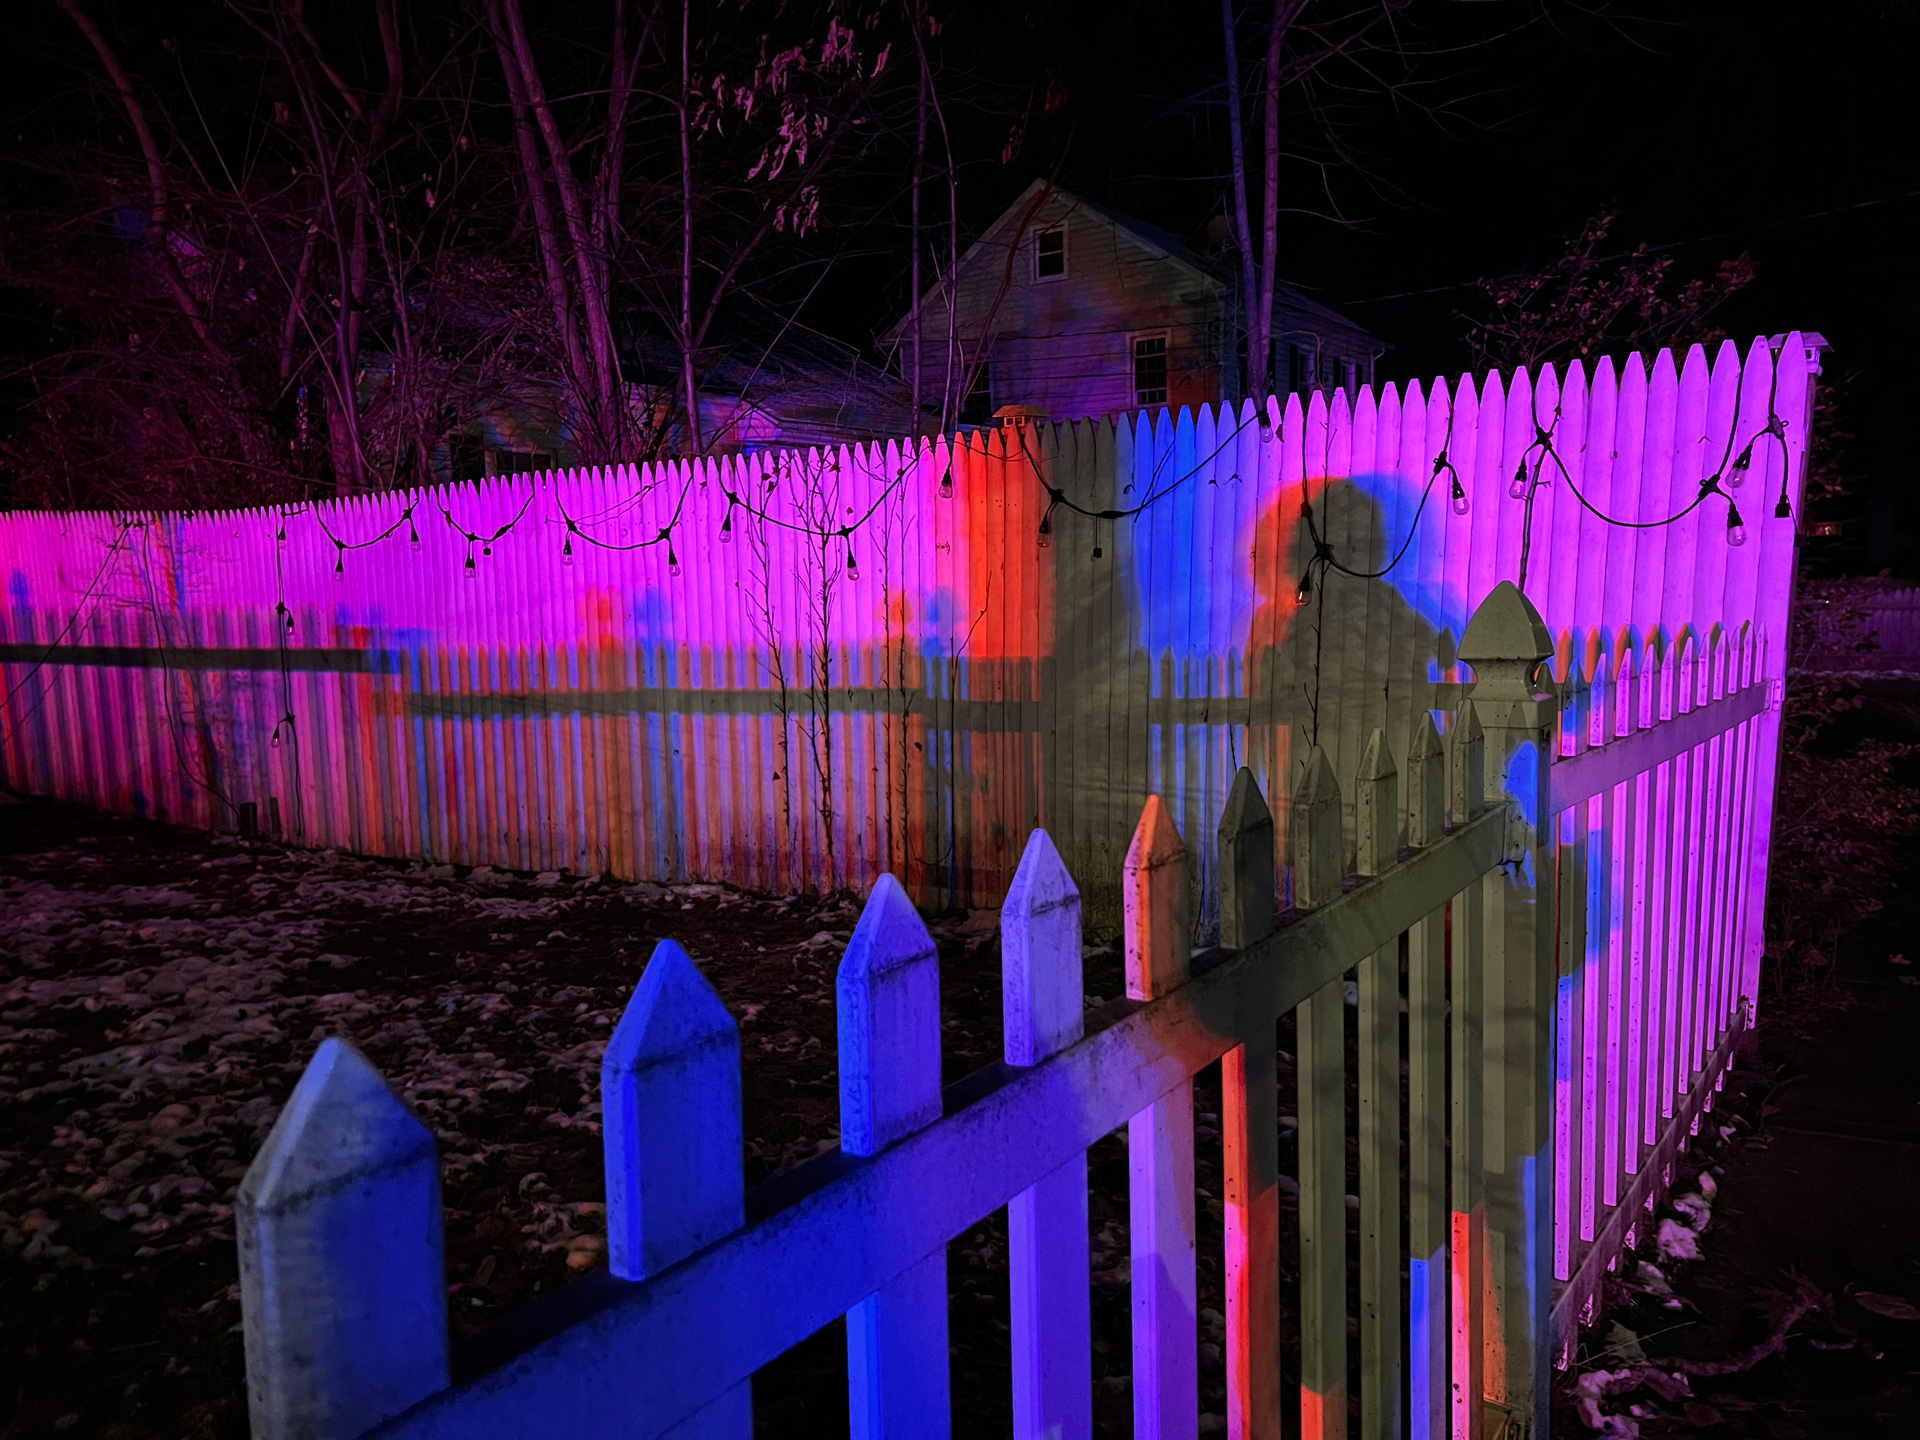 Nighttime scene of fence with colored lights